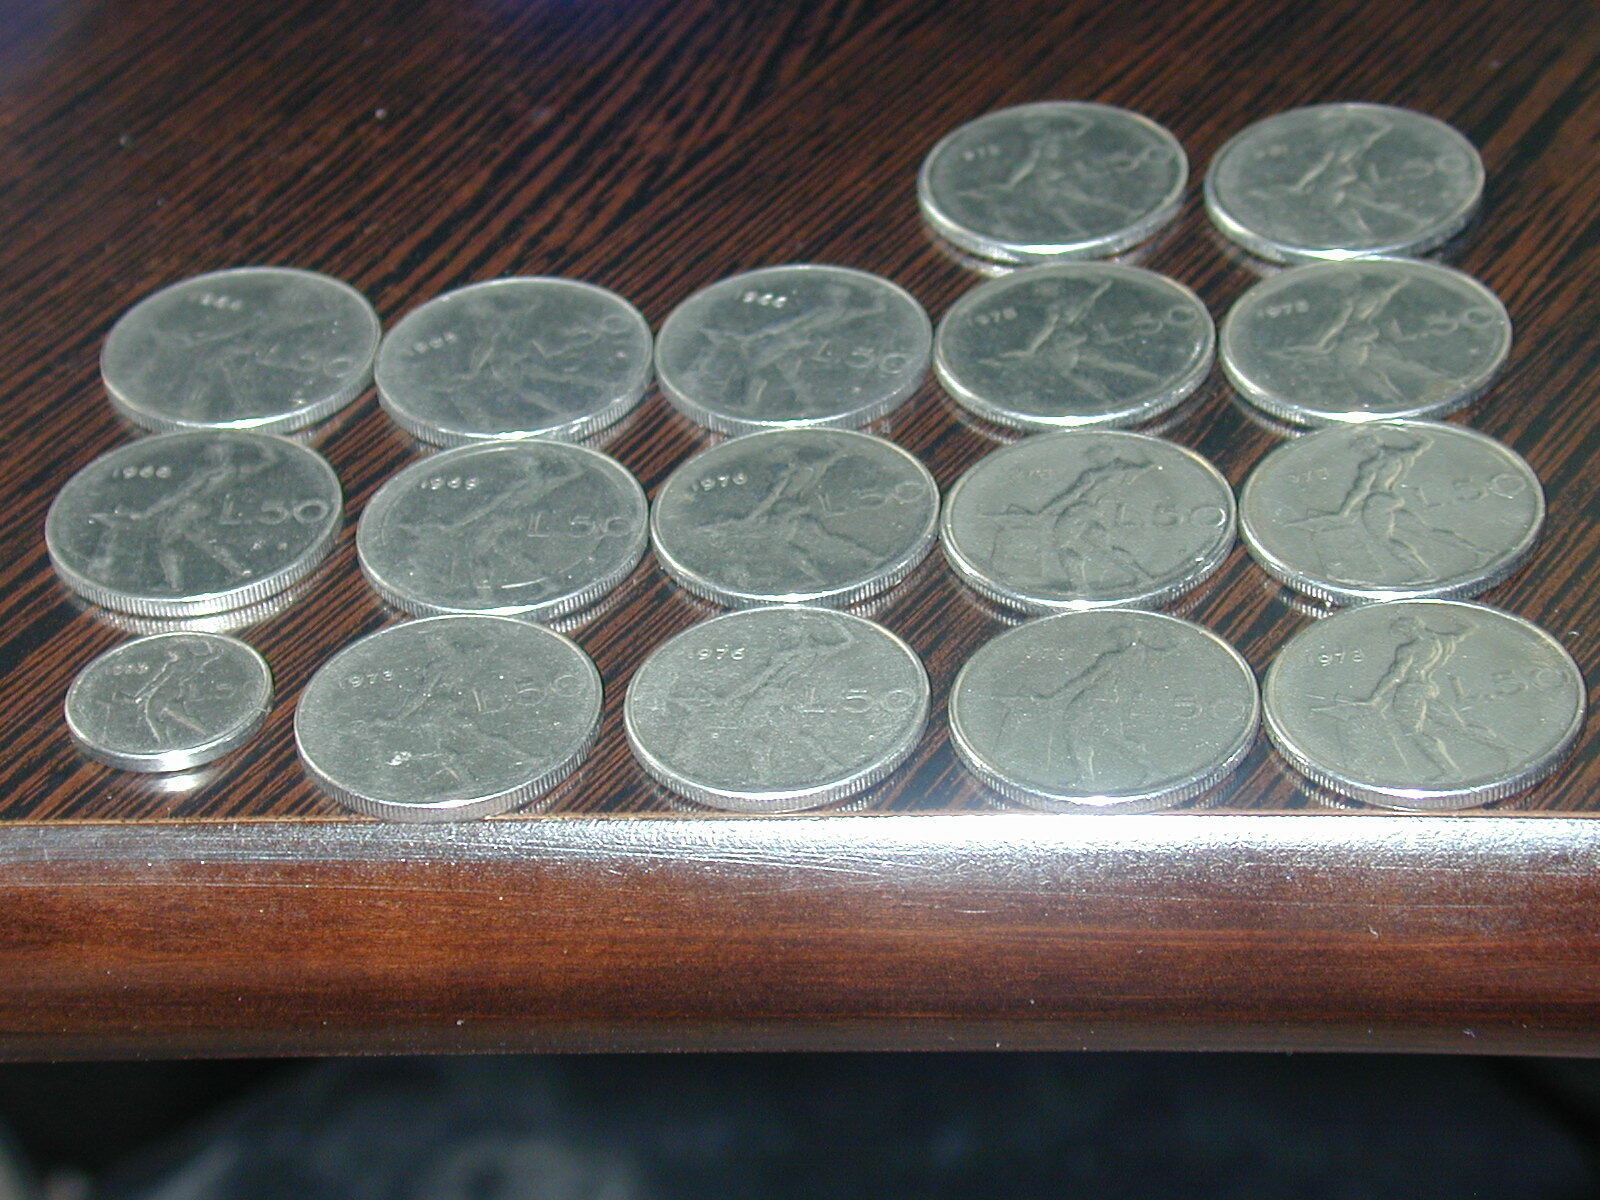 ITALY 19 pc Stainless Steel 50 lire 1955-78 KM95 16 pcs and 1 93 KM95a Nice Lot Без бренда